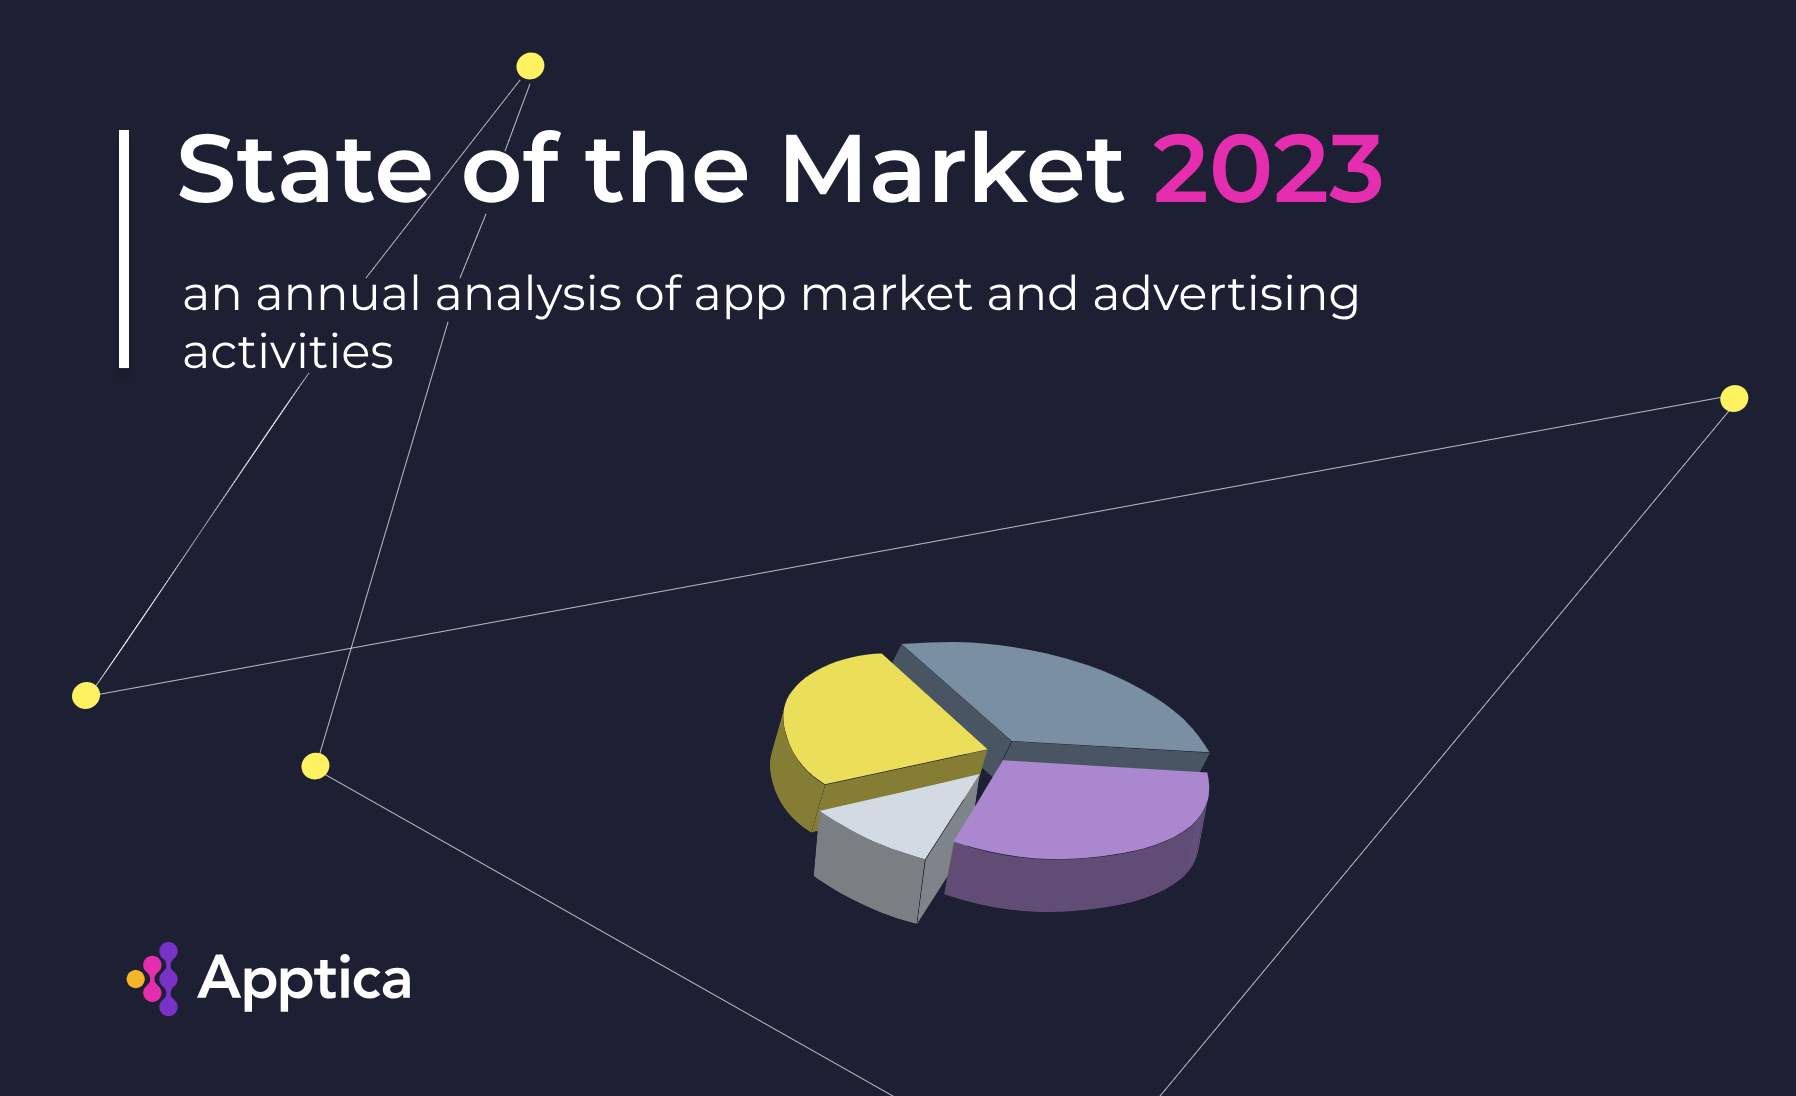 State of the market in 2023. 
An annual analysis of app market and advertising activities.